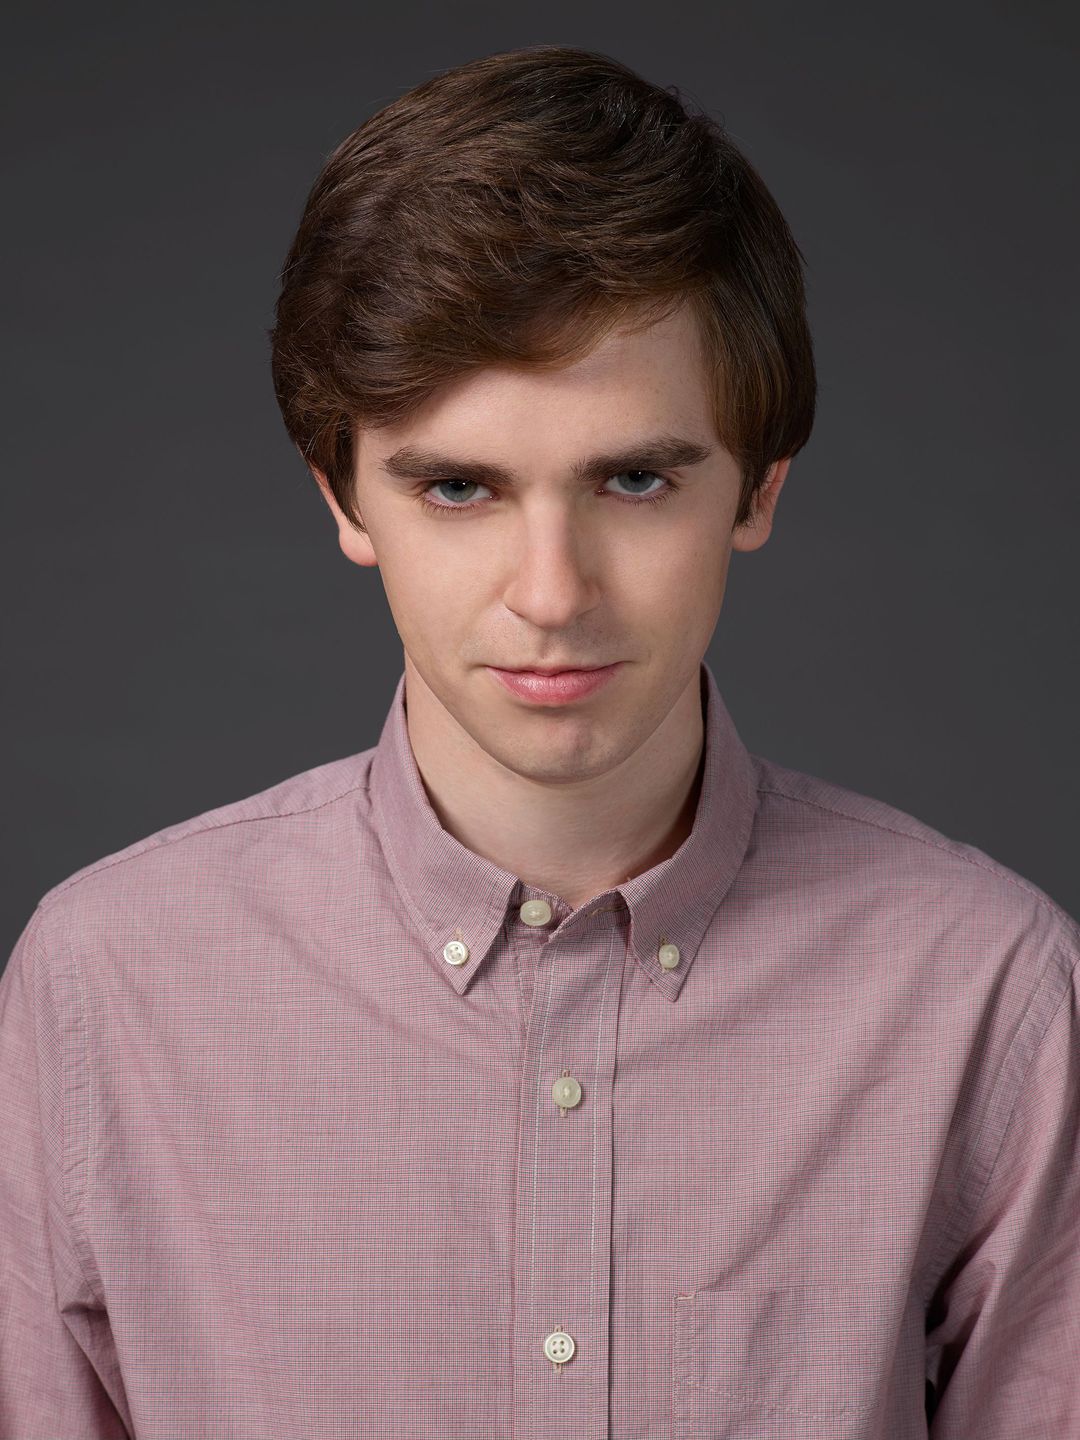 Freddie Highmore early life